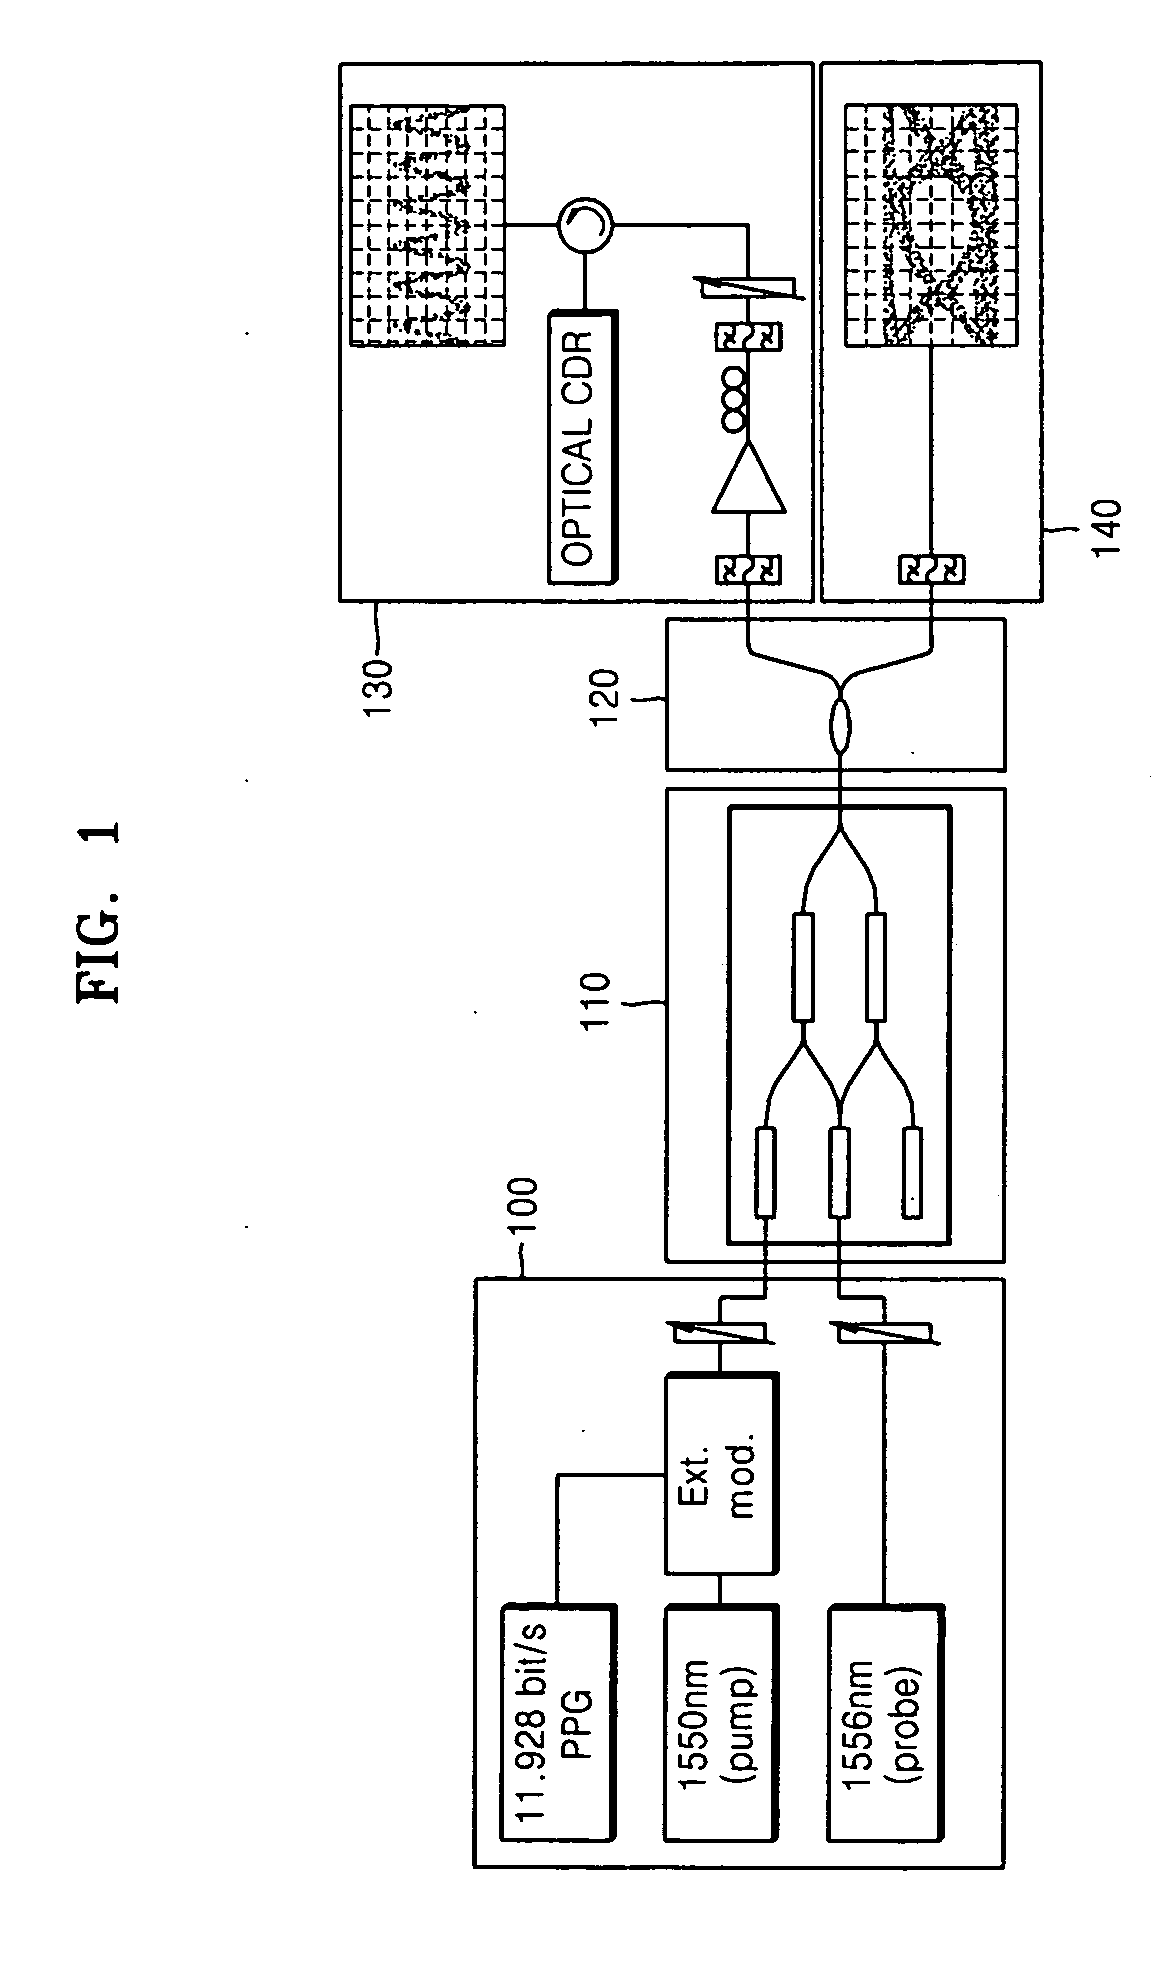 Apparatus and method for wavelength conversion and clock signal extraction using semiconductor optical amplifiers